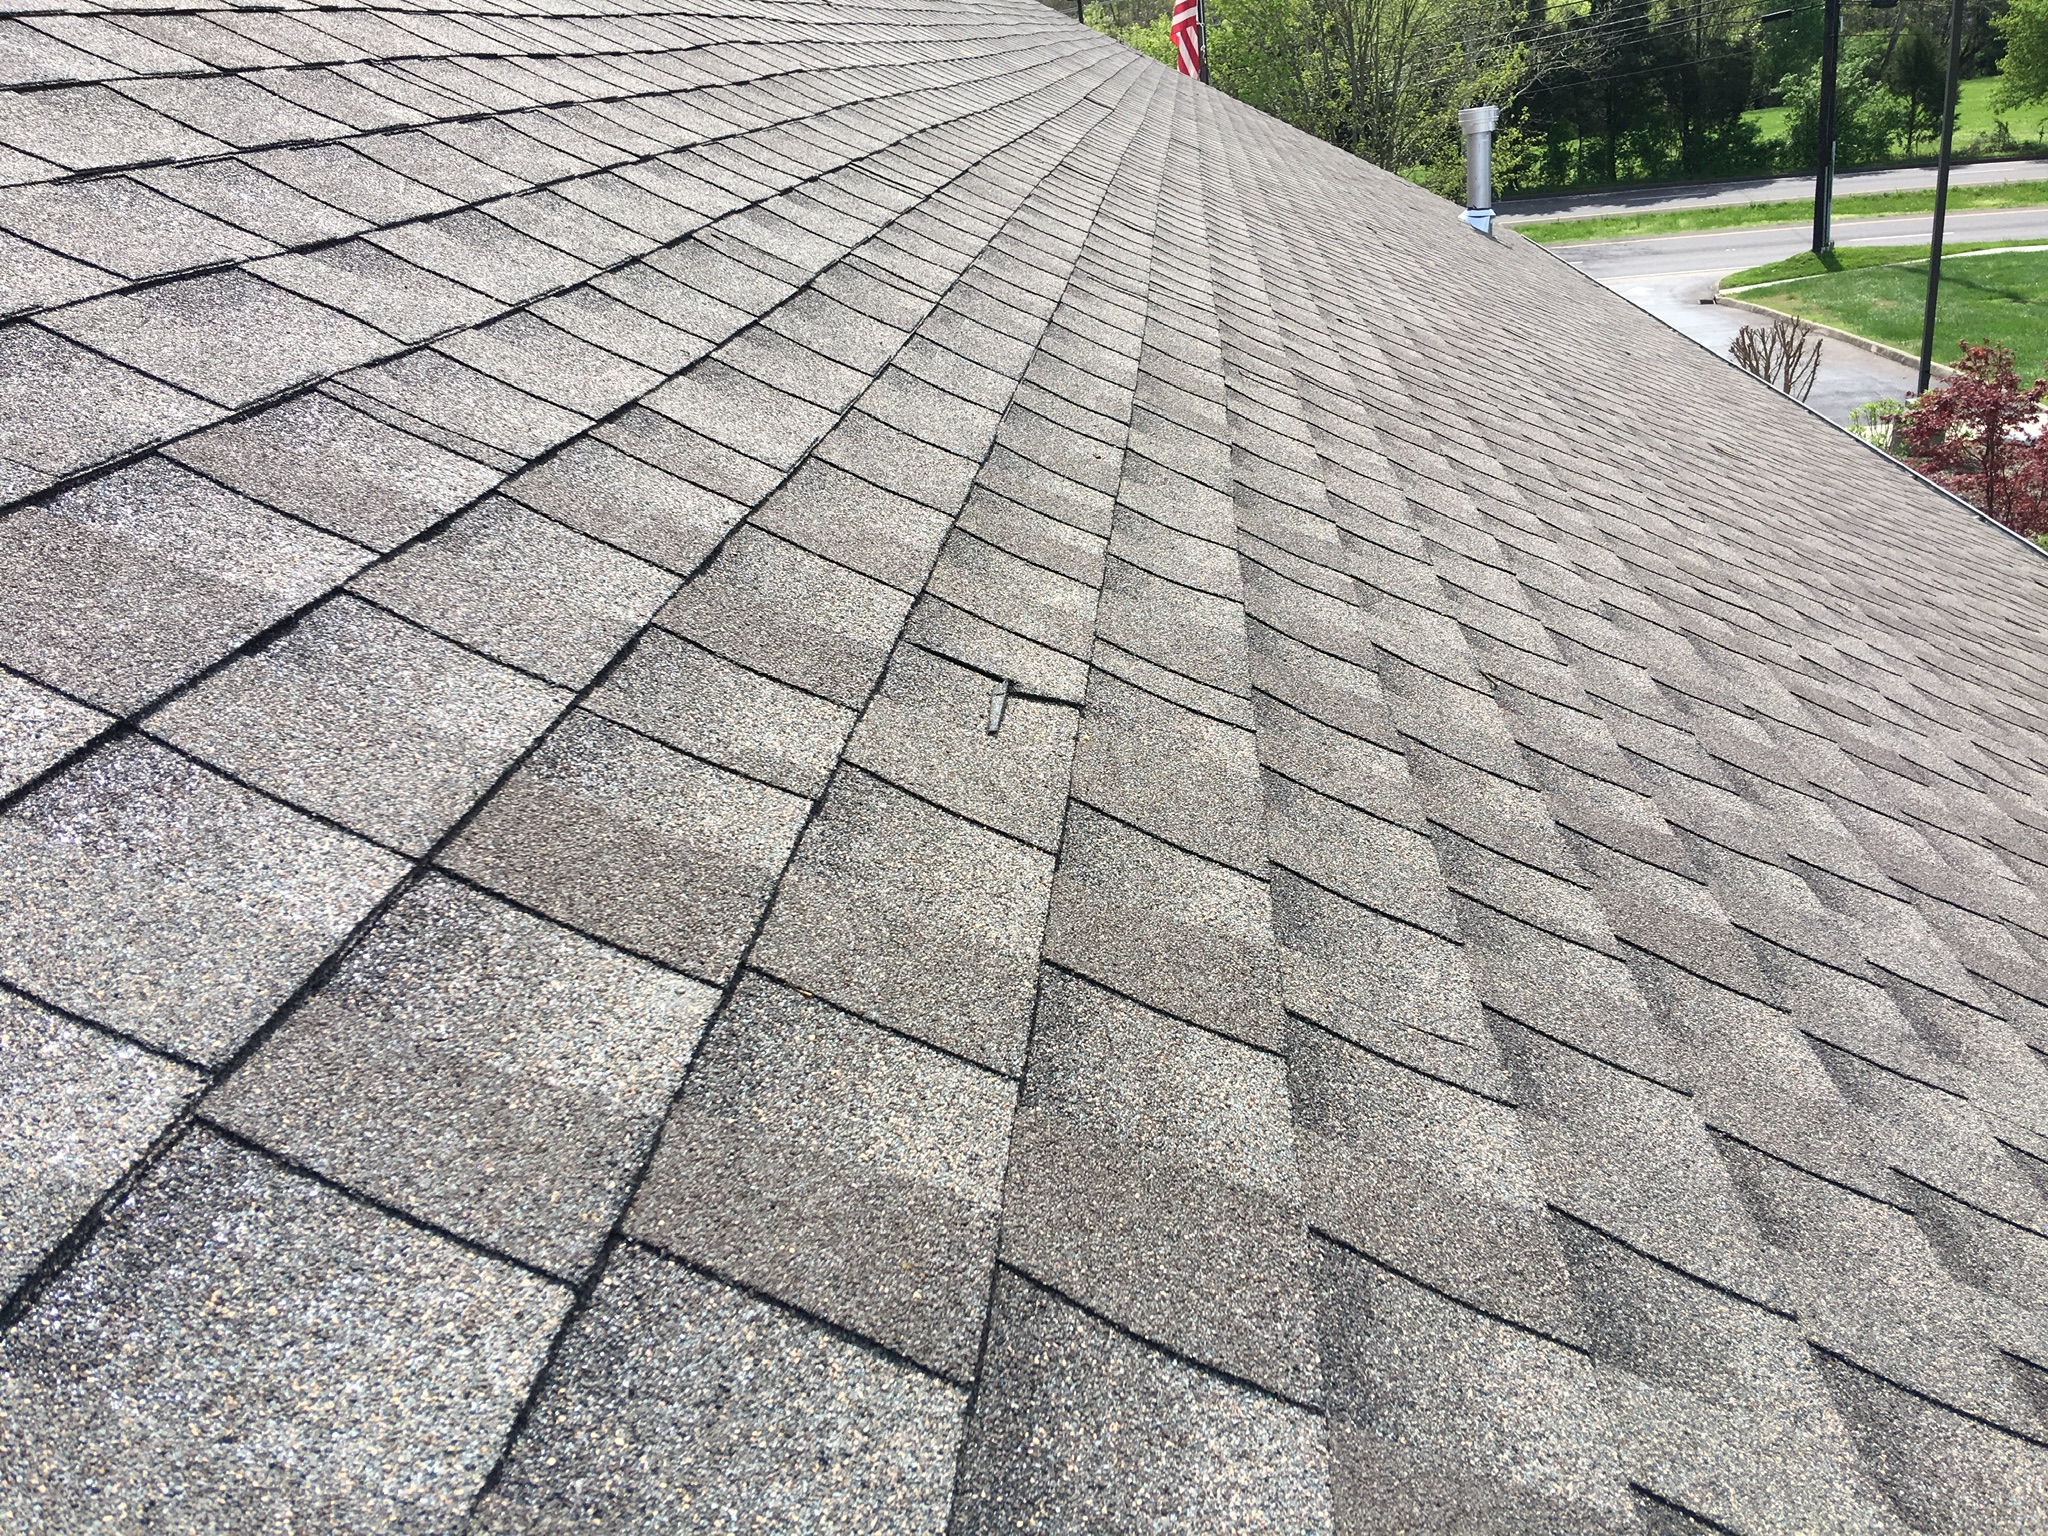 This is an up close view of the GAF shingles installed.